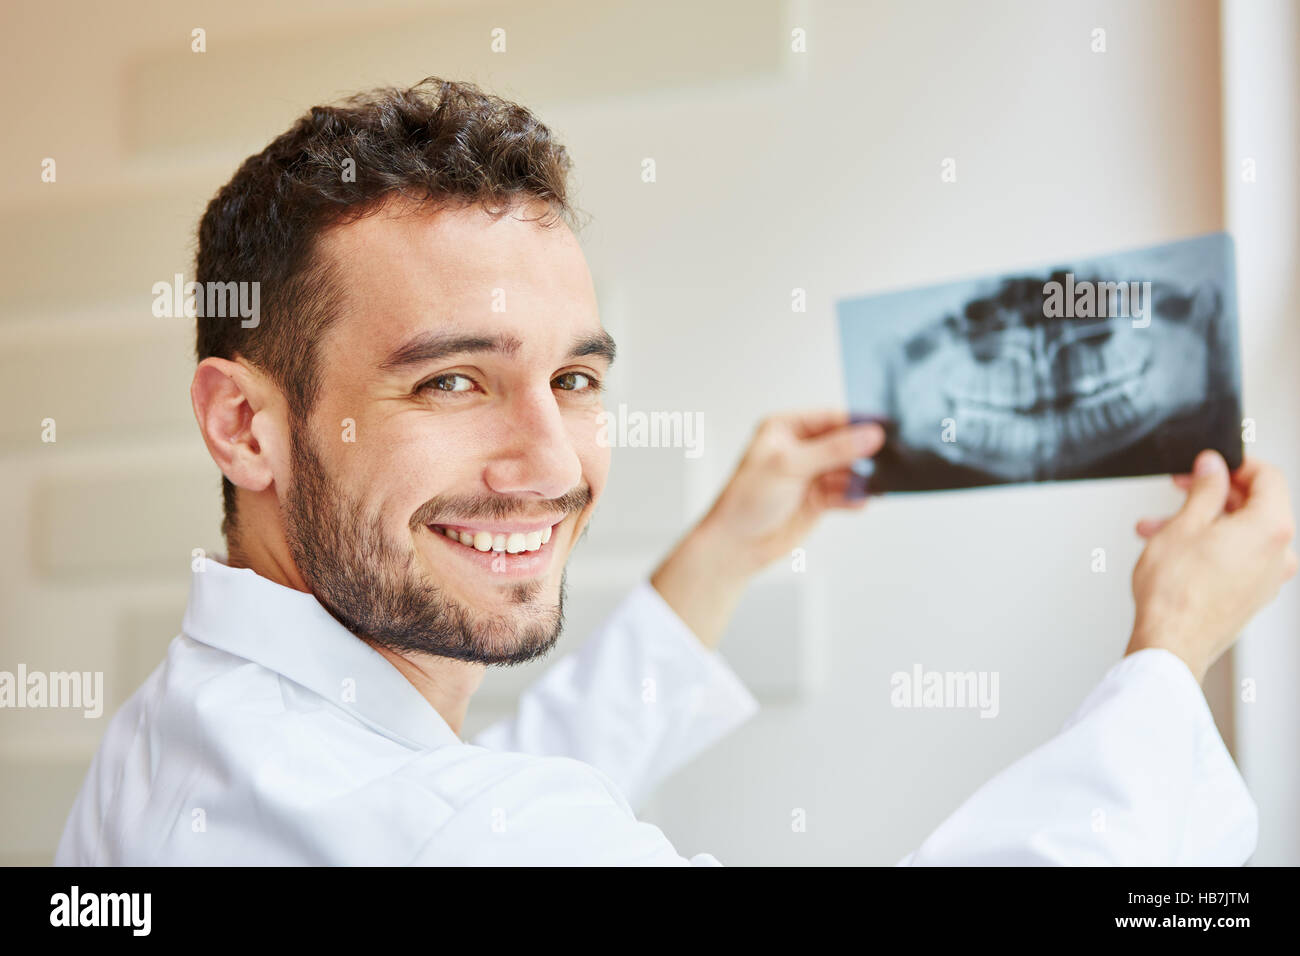 Dentist smiling and holding x-ray with joy Stock Photo